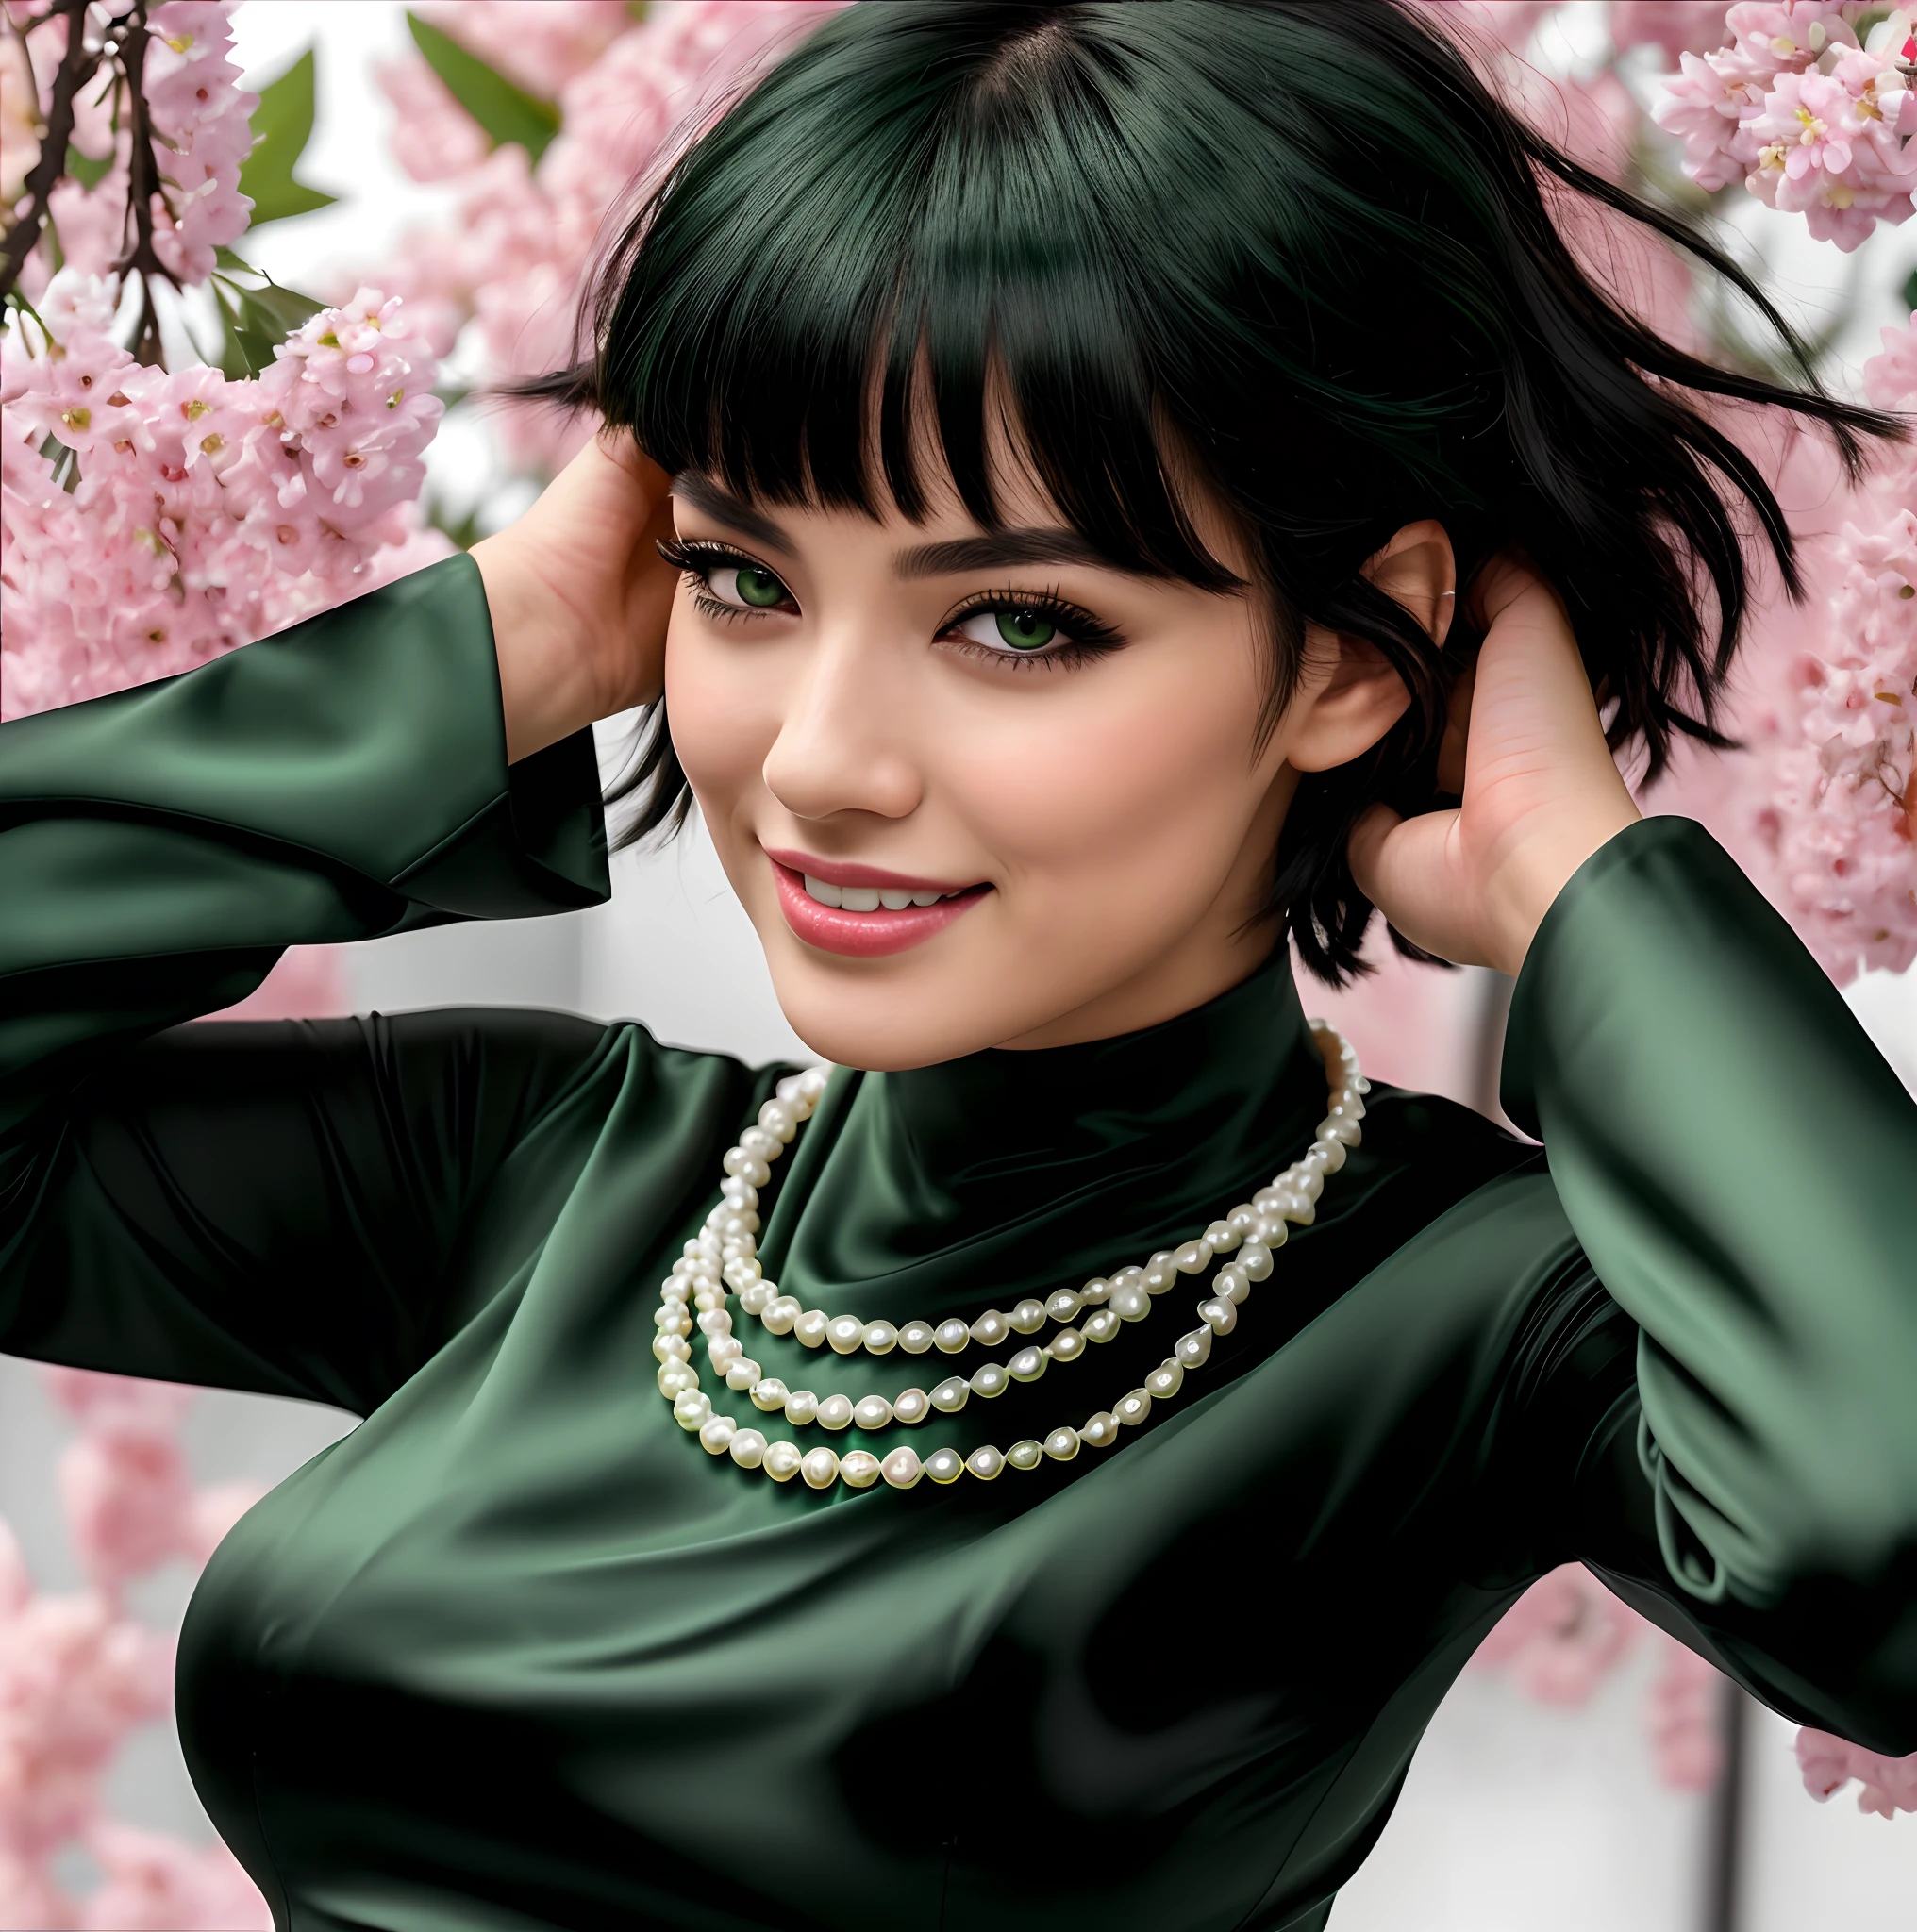 masterpiece, there is a woman with a white pearl necklace and a dark green dress, realistic, she is a wasian, half japanese half white american, pretty woman with green eyes and pretty lips, hot looking, a lot of dark green shading highlights in her hair, twenty four years old, short black hair, moving her hands behind her head, 4k, 8k, high detailed, ultra realistic, ultra detailed photo realistic, smiling with a closed mouth (not showing teeth), she has a short cleopatra bob black hairstyle with green shading, her face is a bit skinny, cute sexy smile